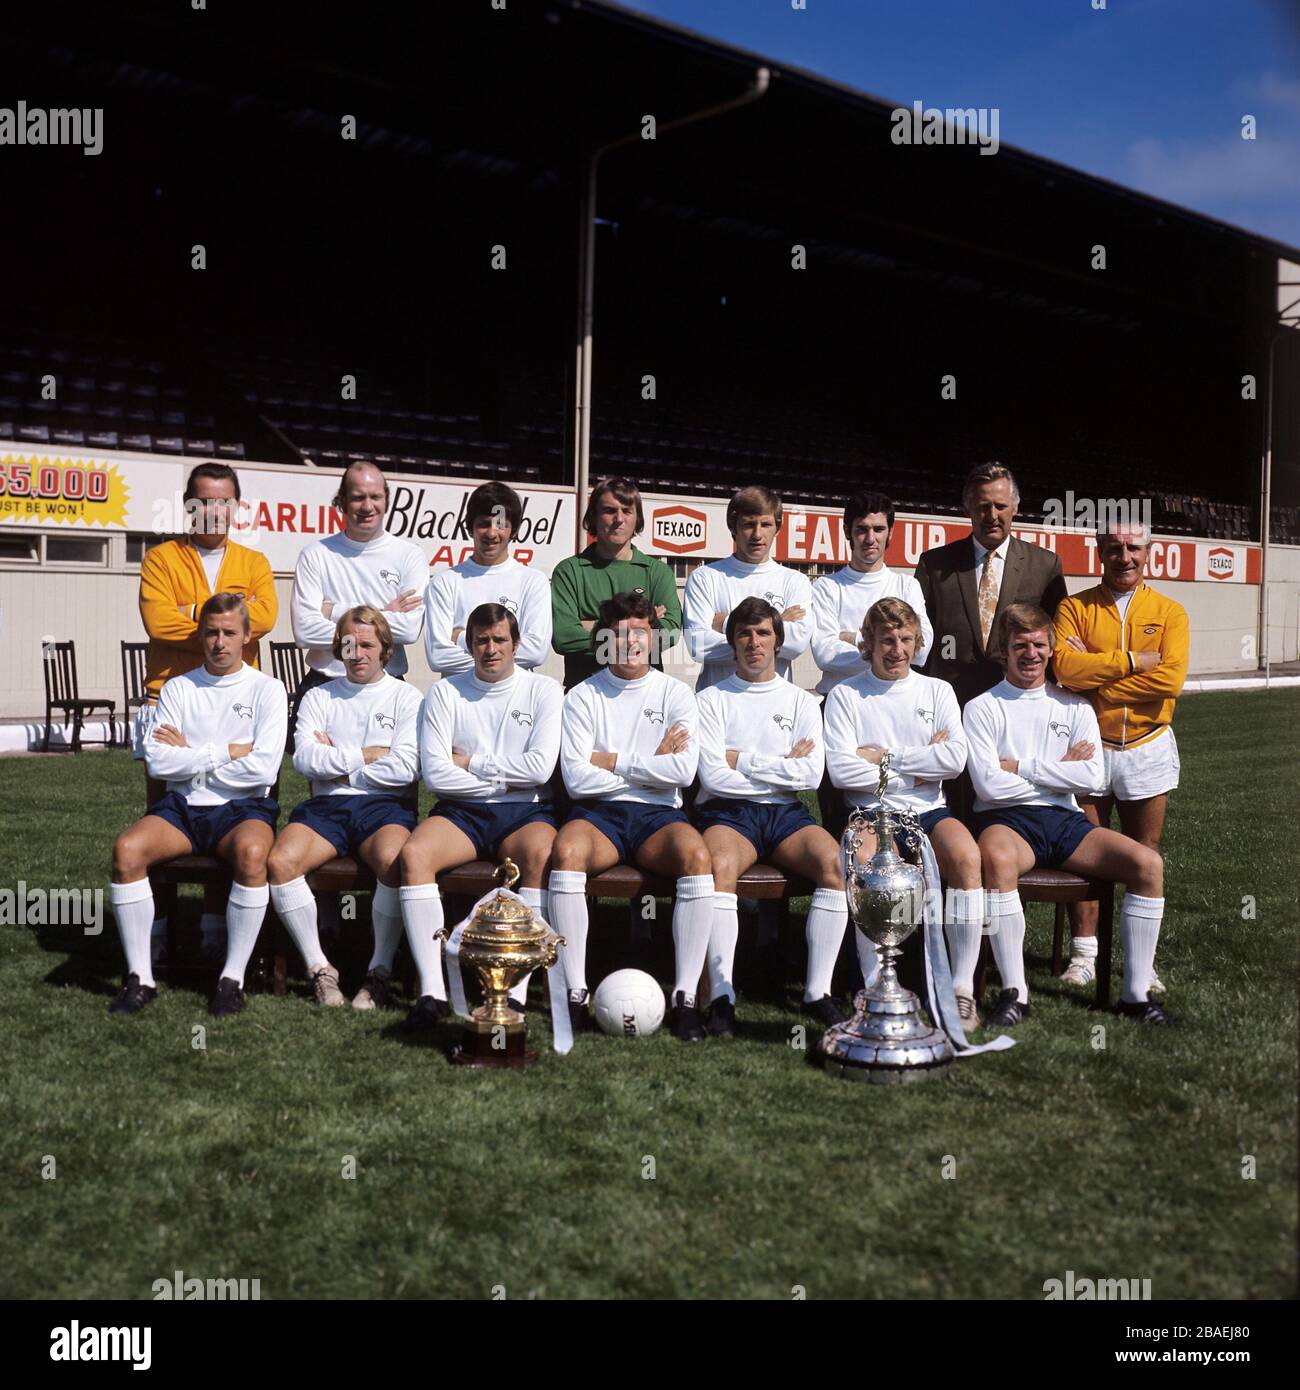 Derby County team group: (back row, l-r) manager Brian Clough, Terry Hennessey, Ron Webster, Colin Boulton, Colin Todd, John Robson, assistant manager Peter Taylor, trainer Jimmy Gordon; (front row, l-r) John McGovern, Archie Gemmill, John O'Hare, Roy McFarland, Kevin Hector, Alan Hinton, Alan Durban Stock Photo